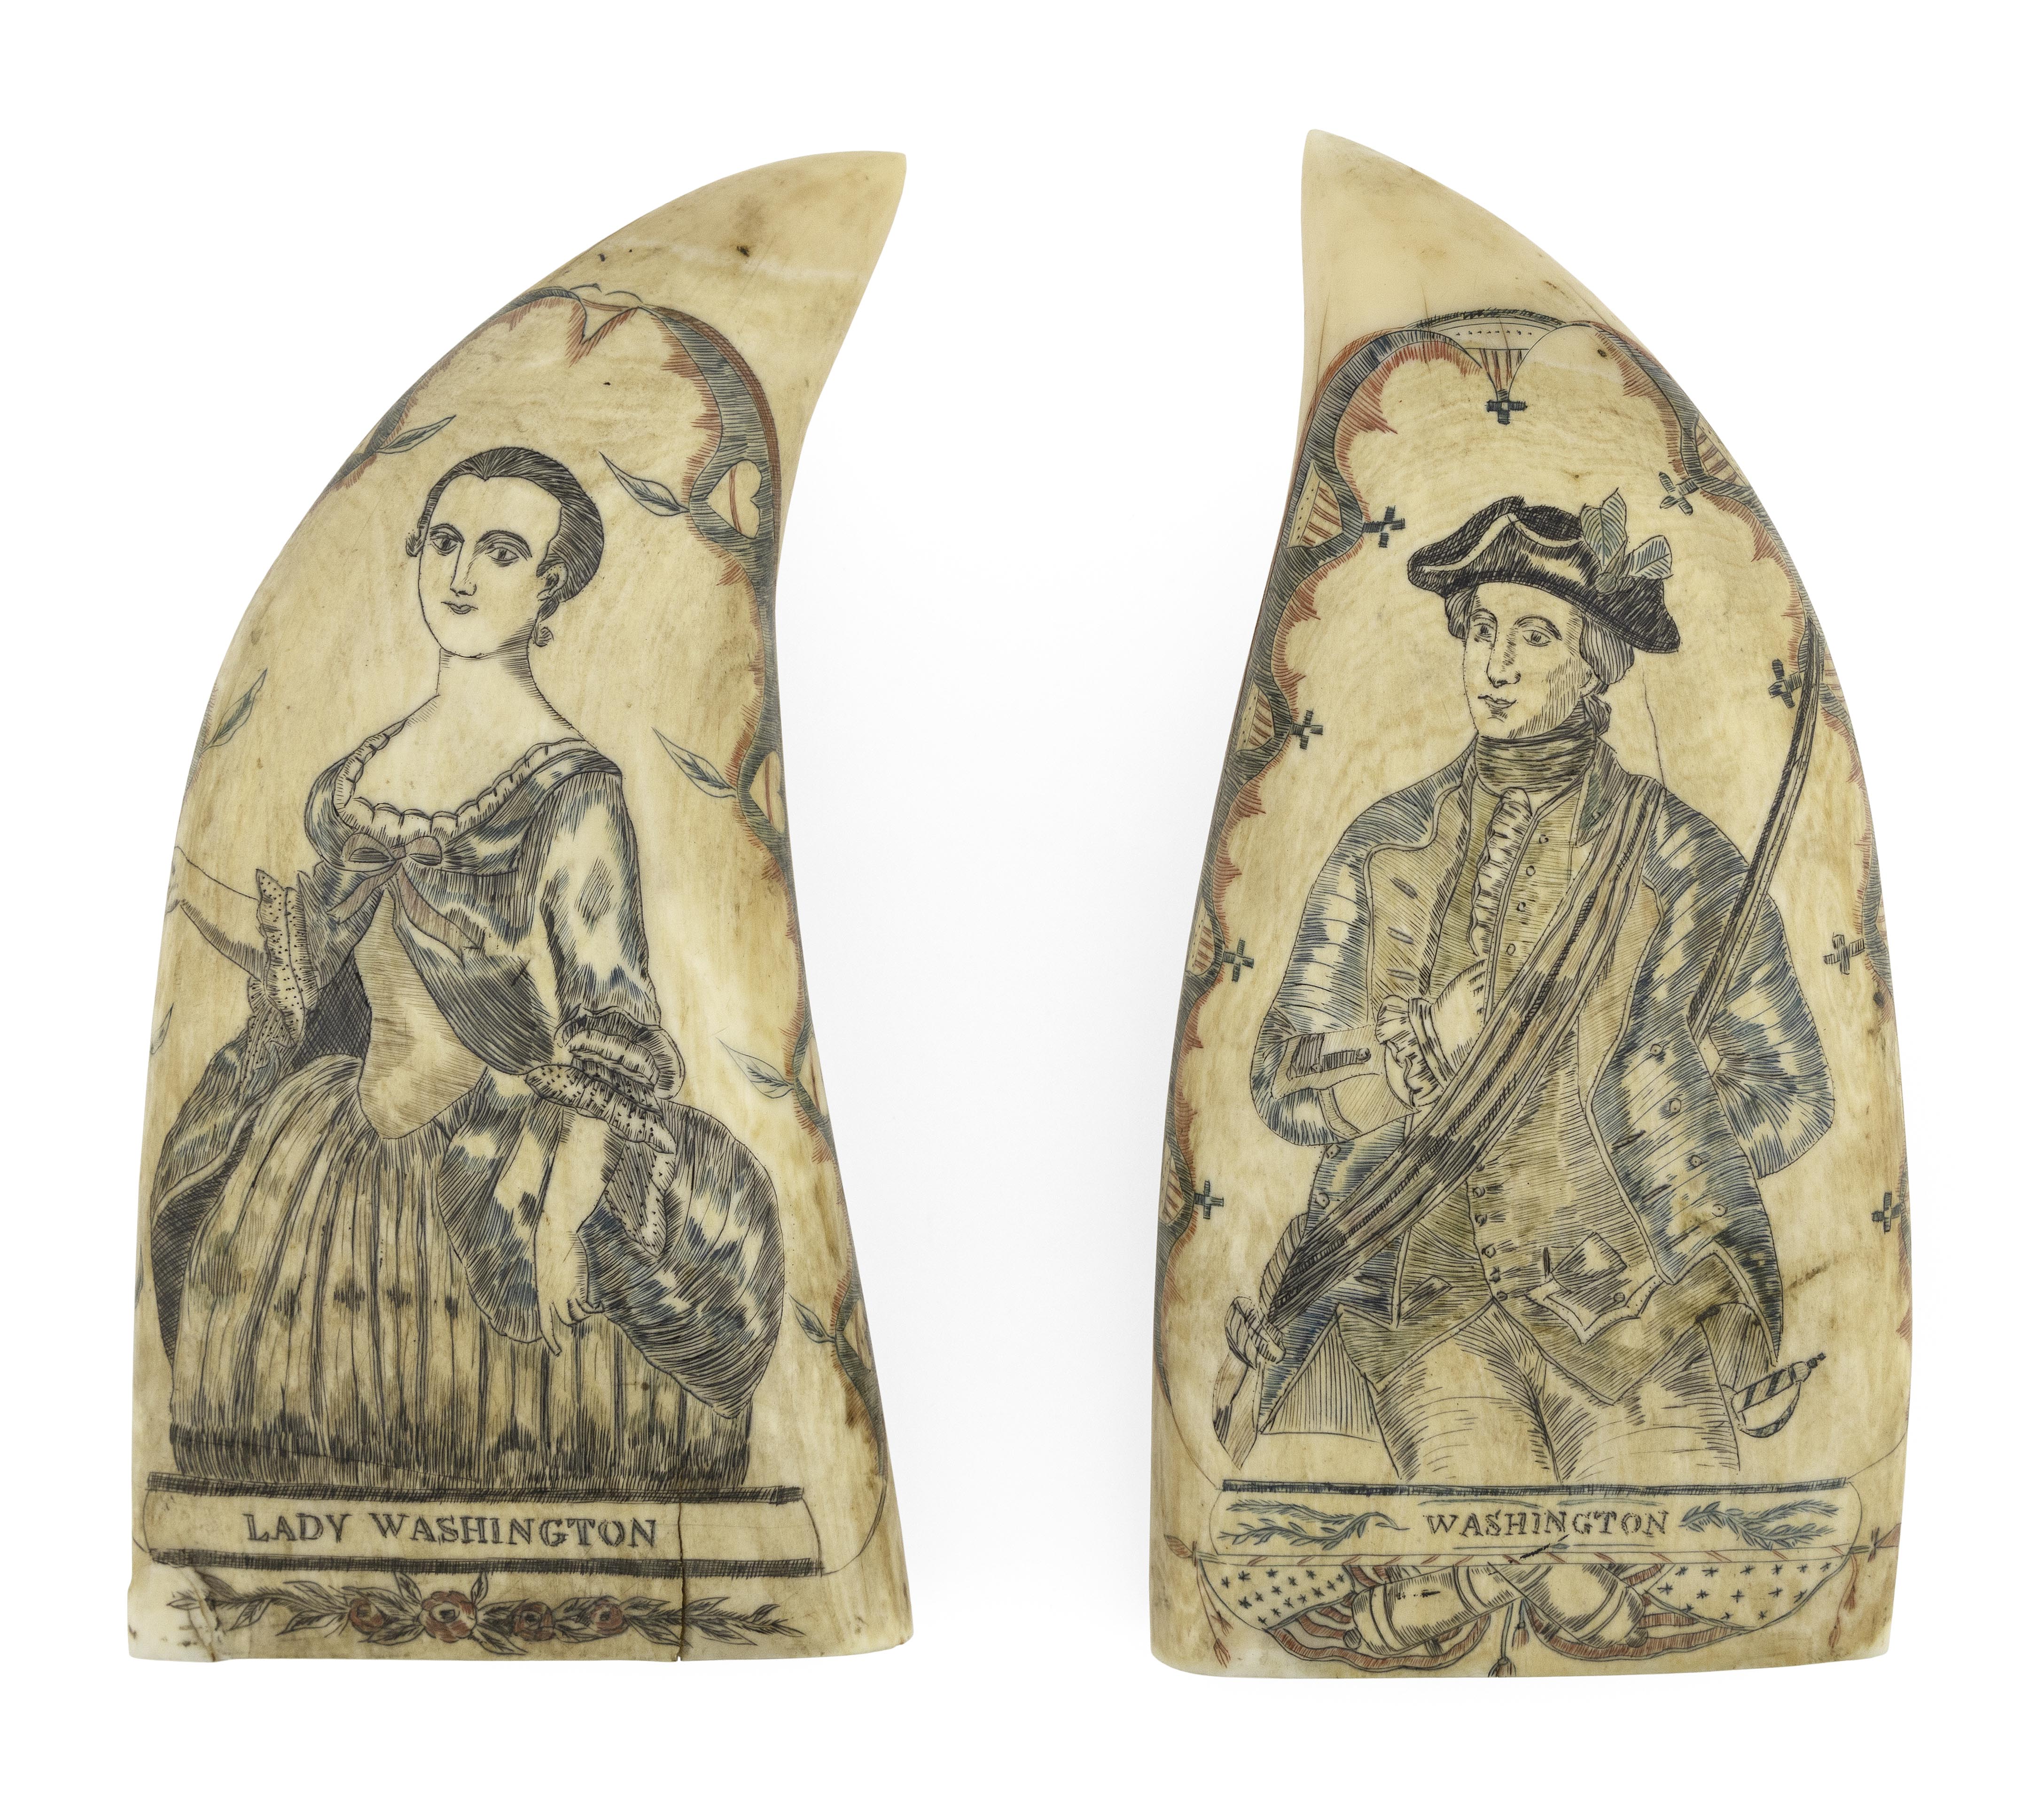 PAIR OF EXCEPTIONAL POLYCHROME SCRIMSHAW WHALE’S TEETH WITH PORTRAITS OF GEORGE AND MARTHA WASHINGTON Mid-19th Century Lengths 6.25